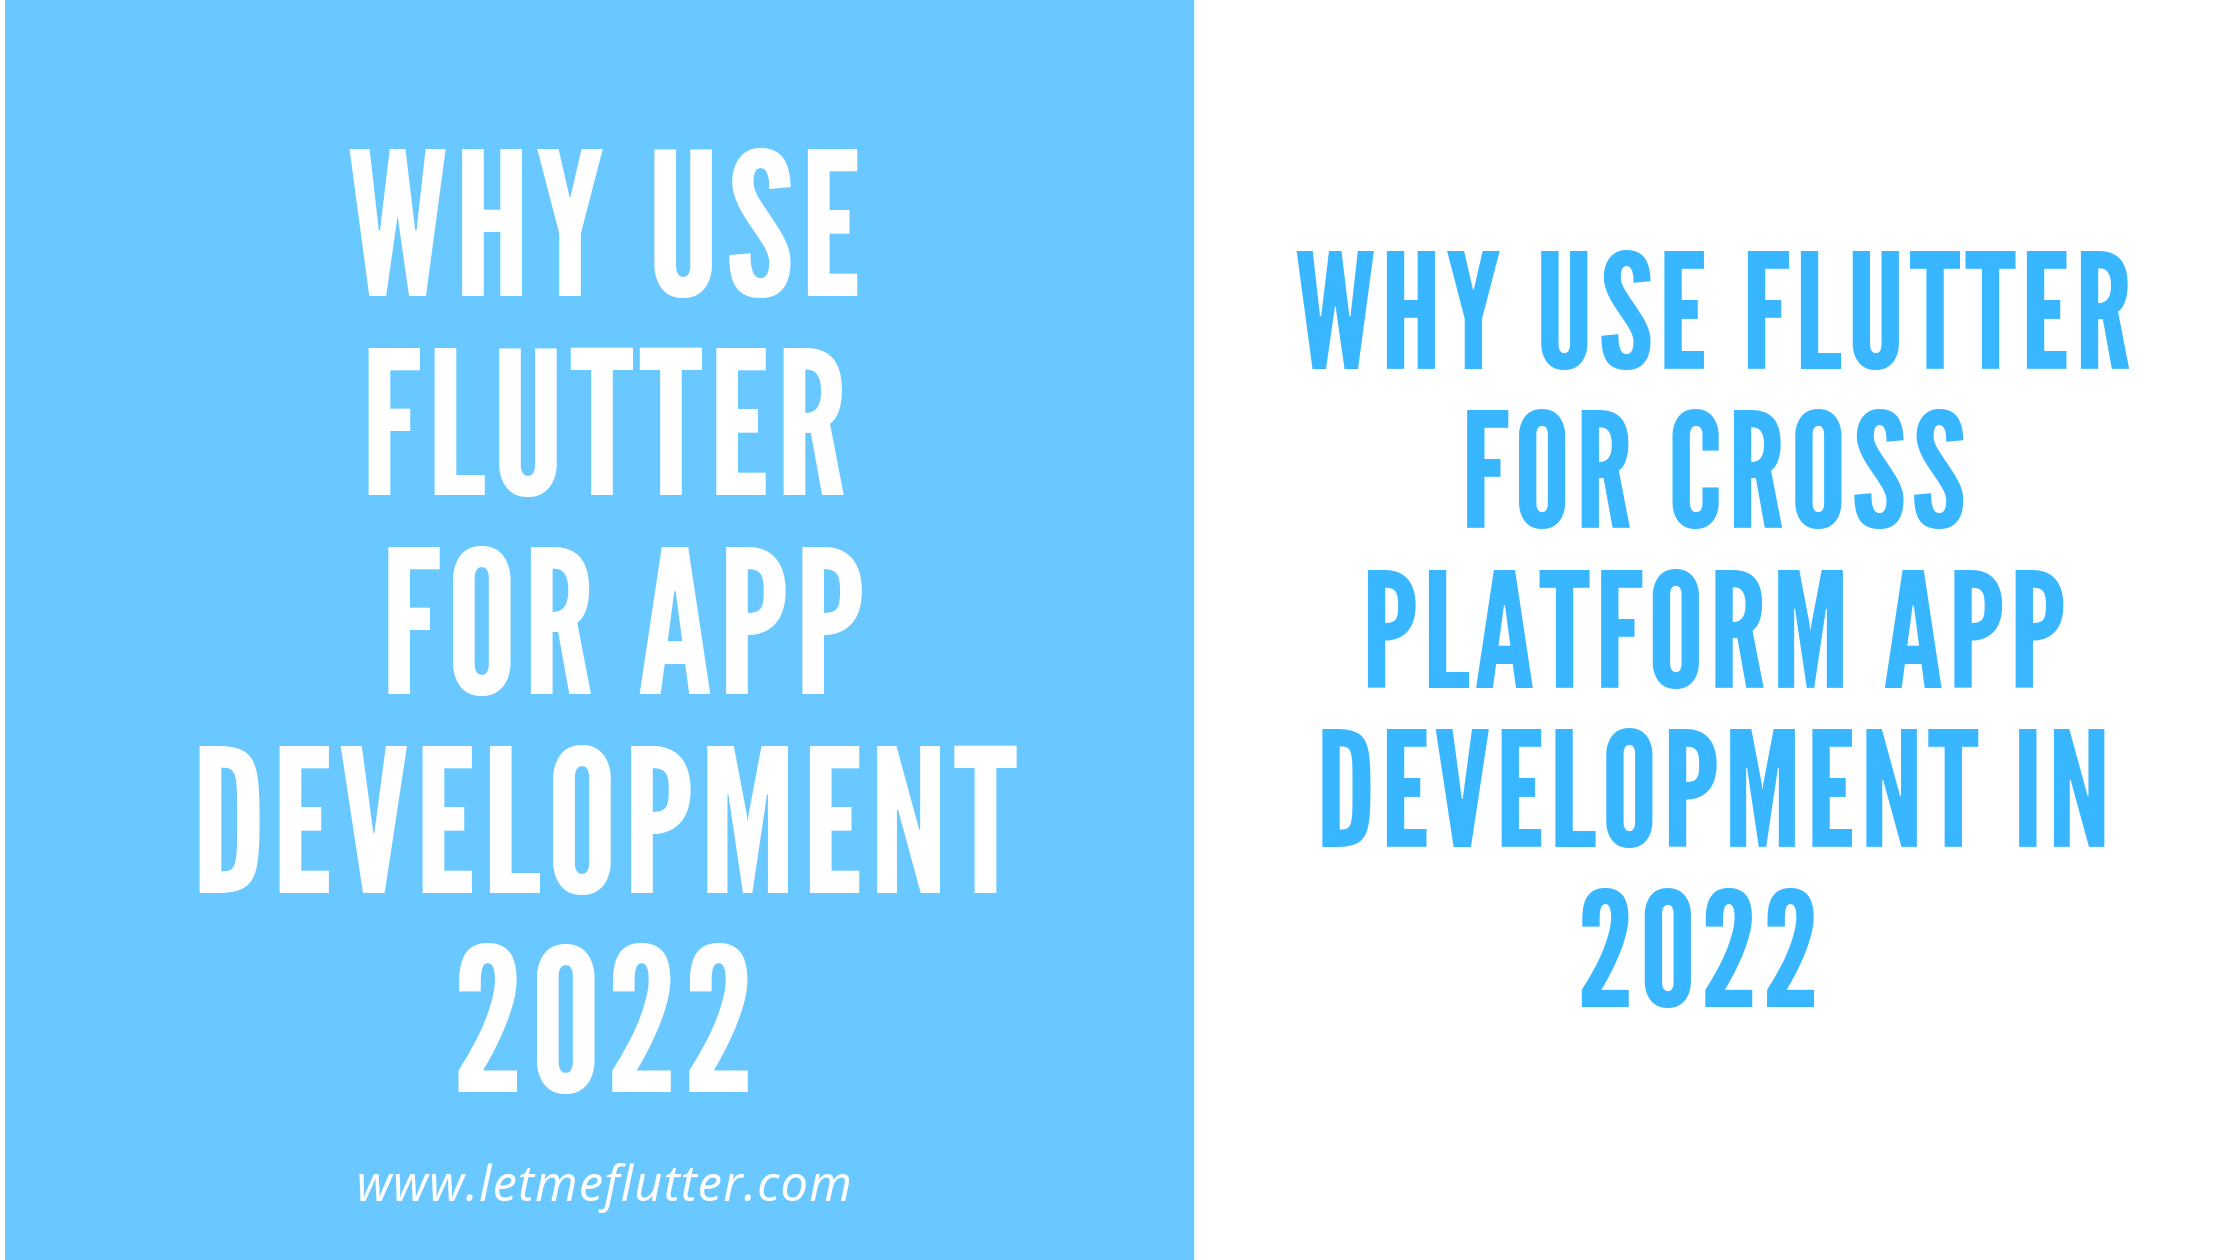 flutter is used for